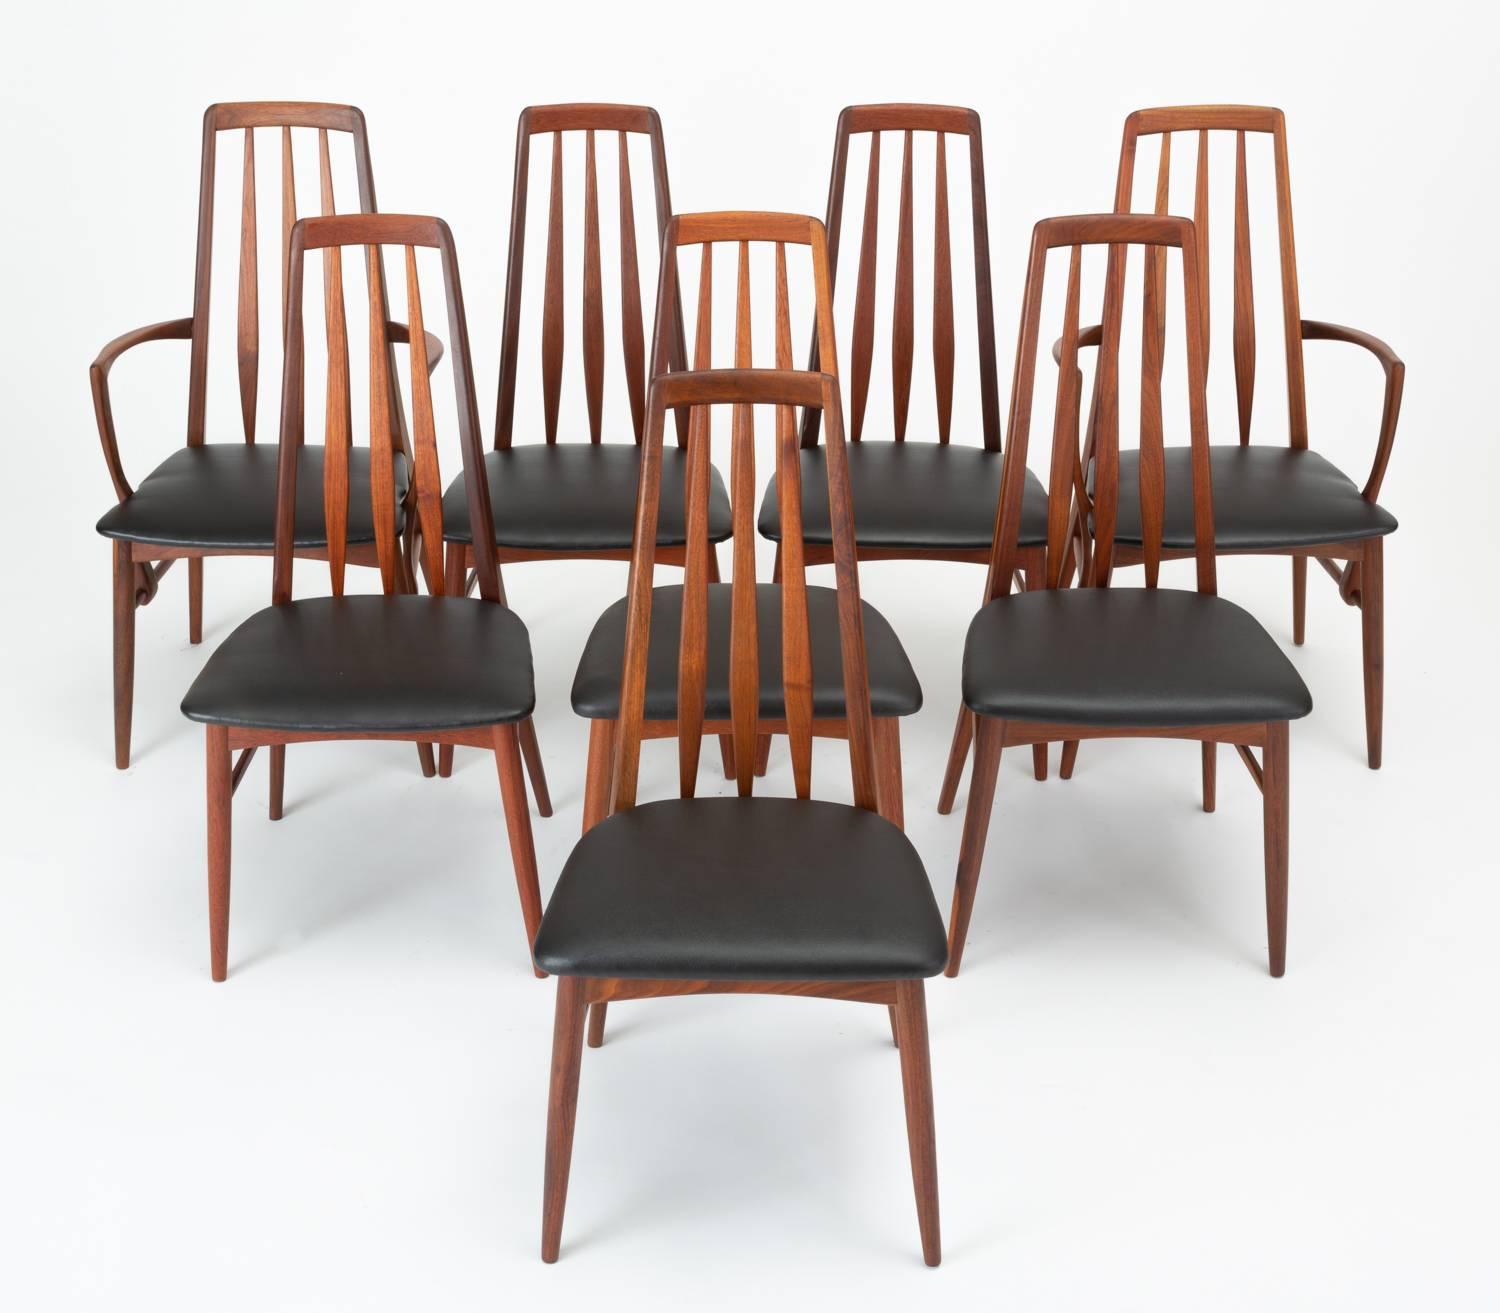 A set of eight “Eva” dining chairs by Niels Koefoed for his family company, Koefoeds Mobelfabrik of Hornslet, Denmark. Designed in 1964, the Eva chair is defined by its sloped backrest and three vertical slats that conform to the curves of the